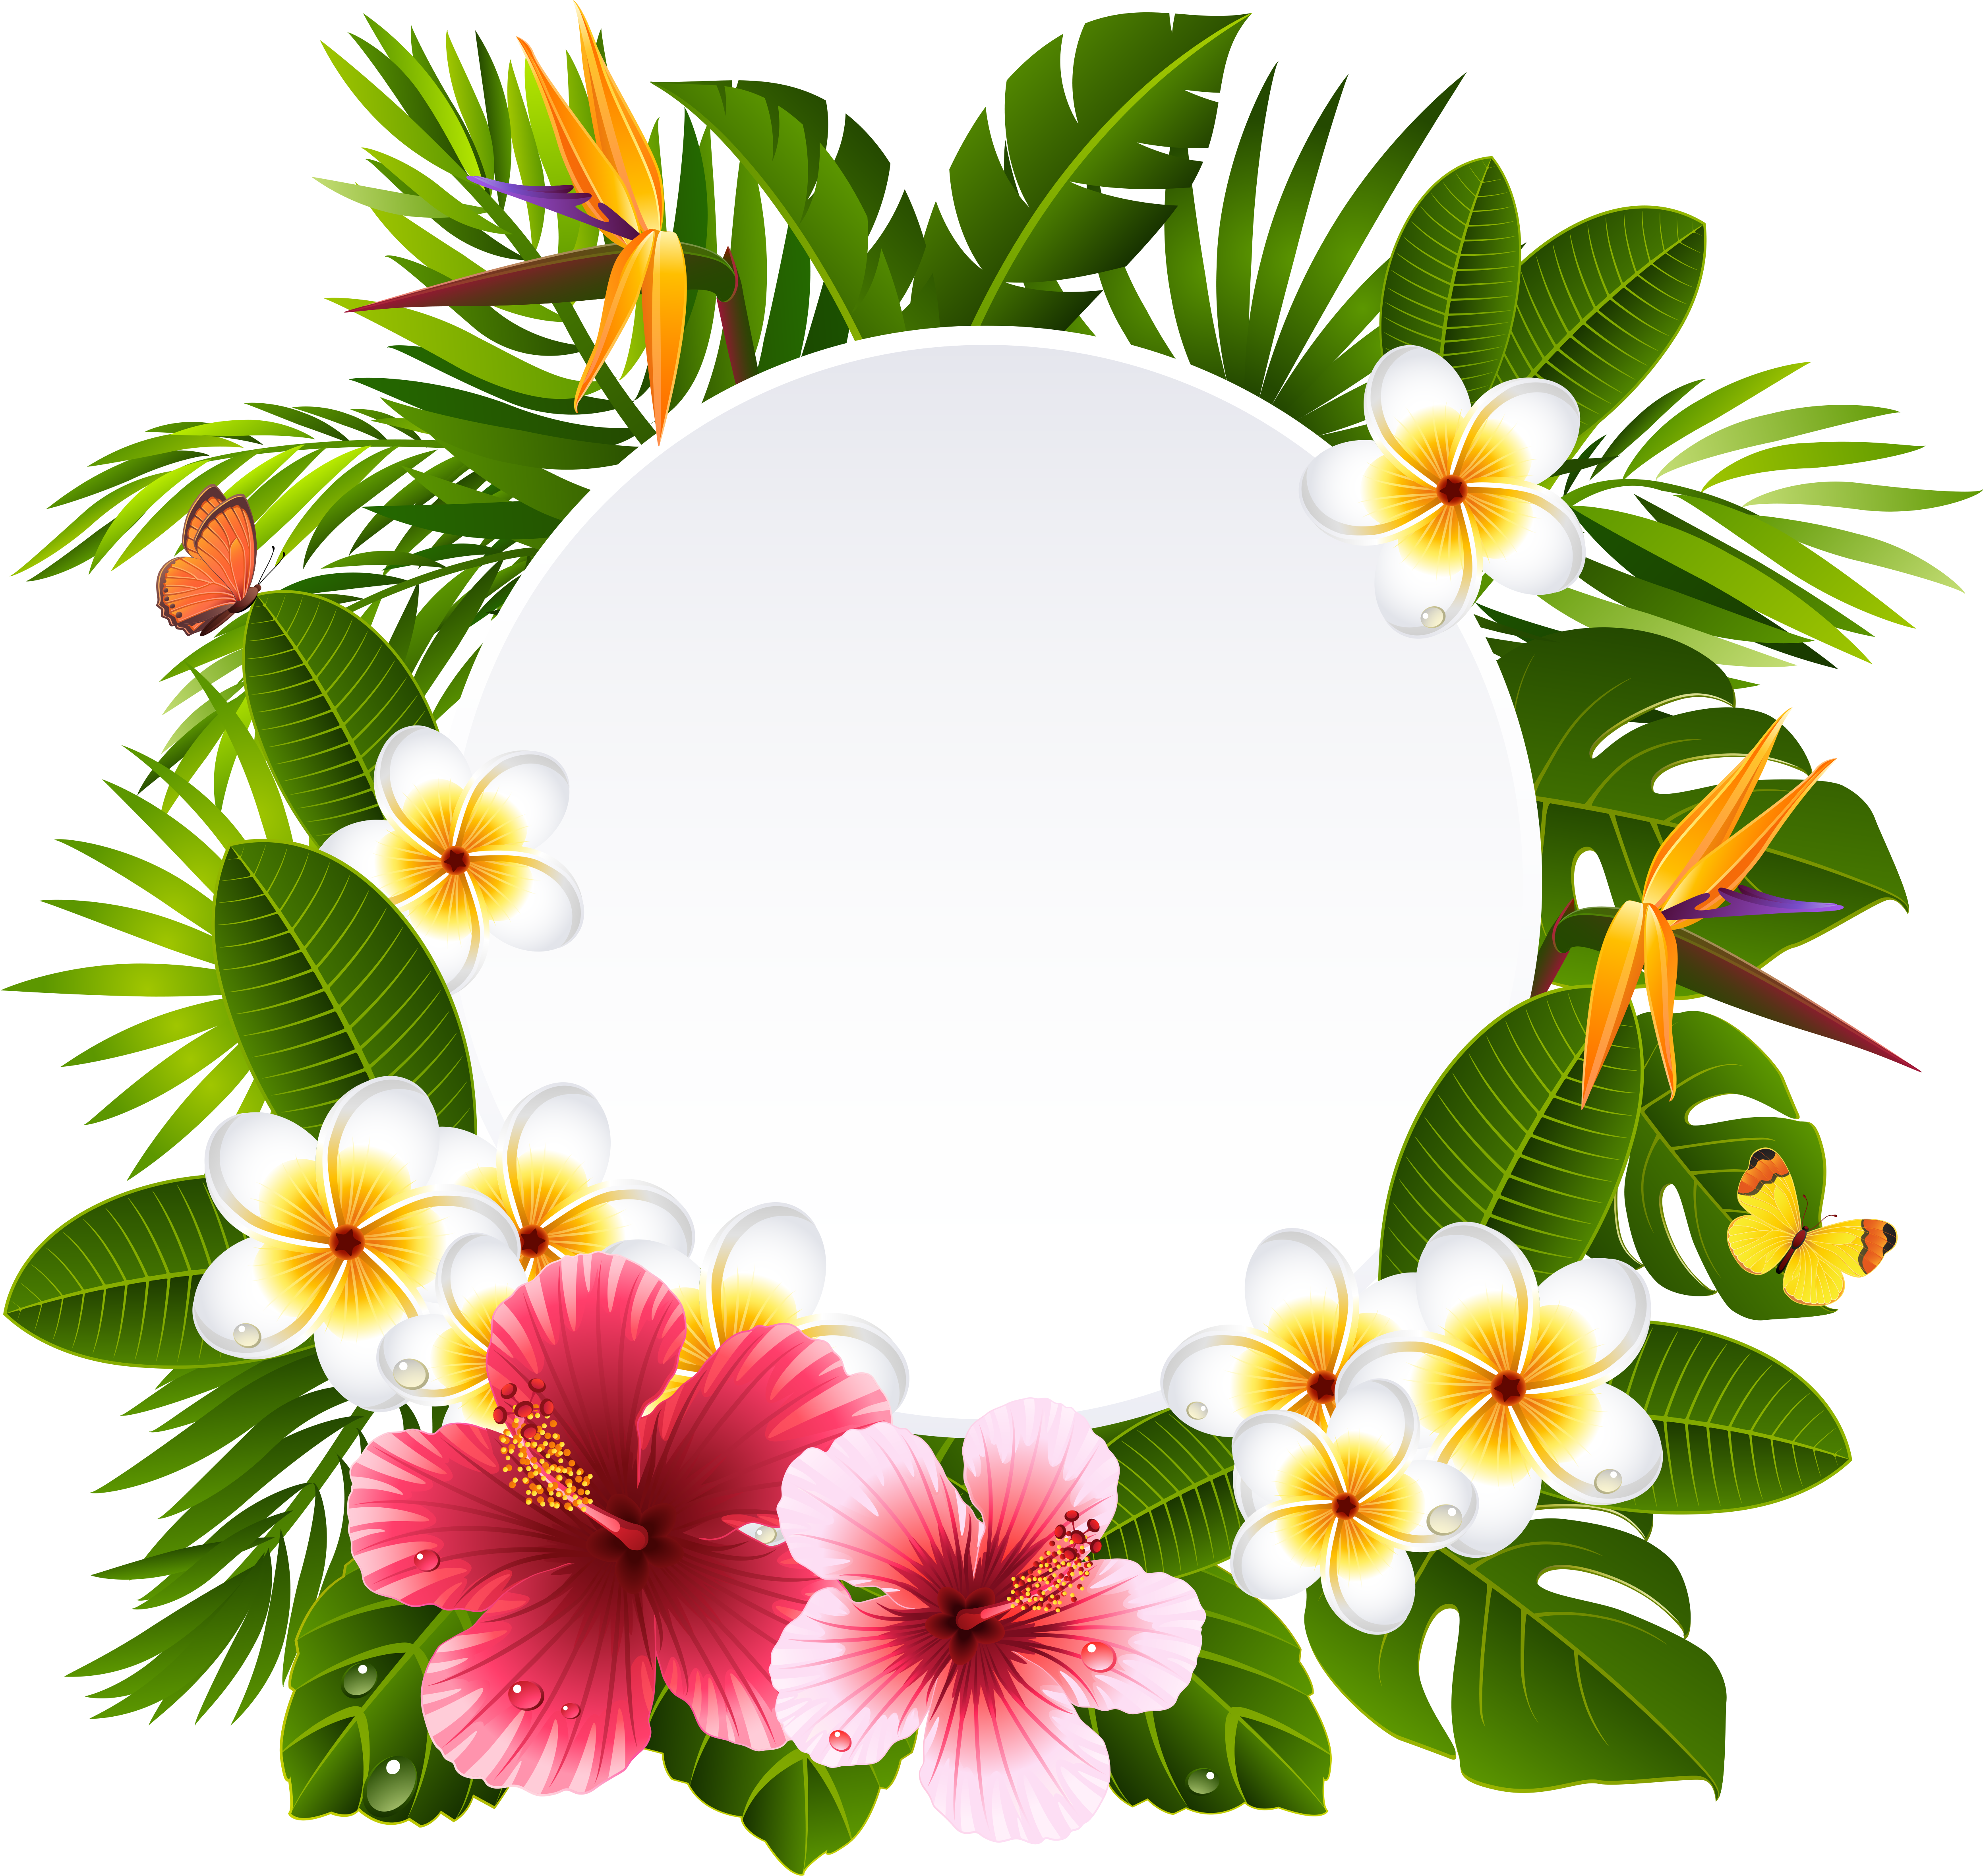 A White Circle With Flowers And Leaves Around It